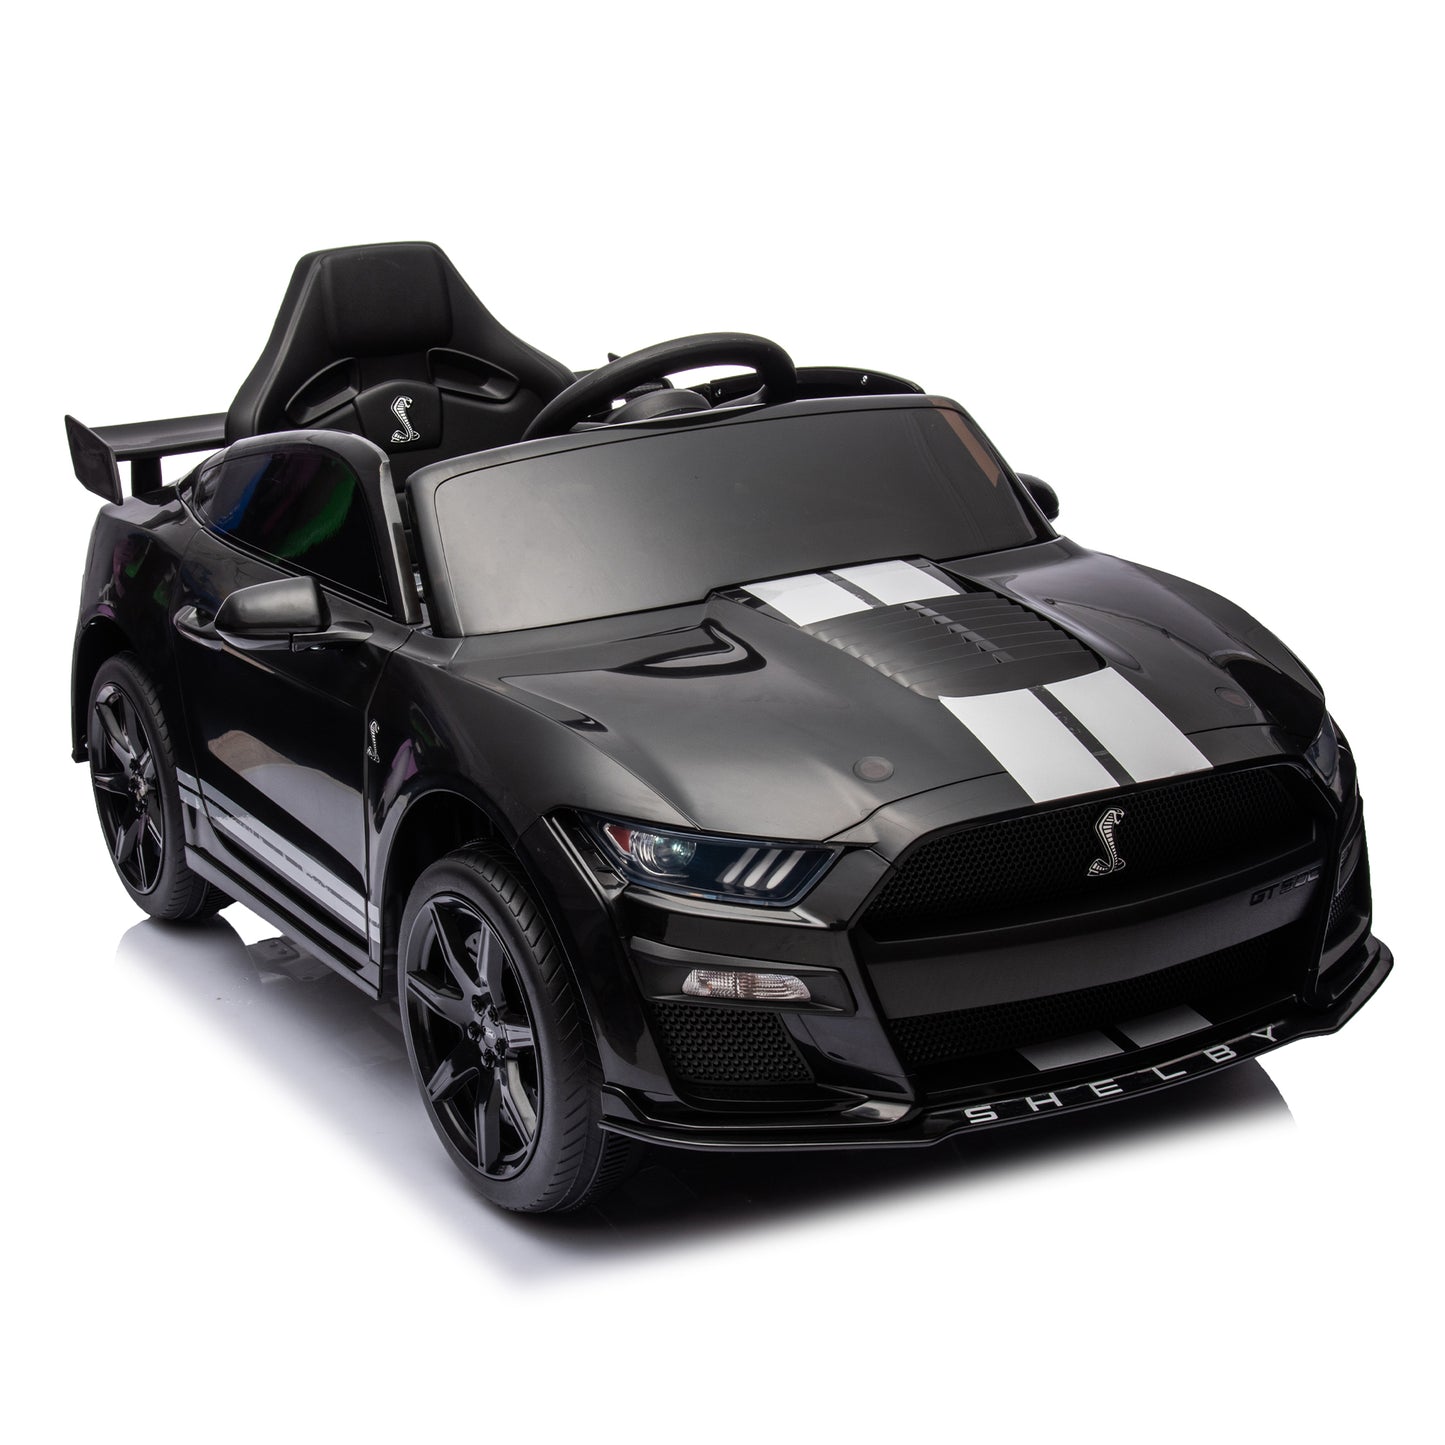 12V Ford Mustang Shelby GT500 ride on car with Remote Control 3 Speeds, Electric Vehicle Toy for Kid,LED Lights, Radio, AUX/USB MP3 Music,safe belt,Age3+